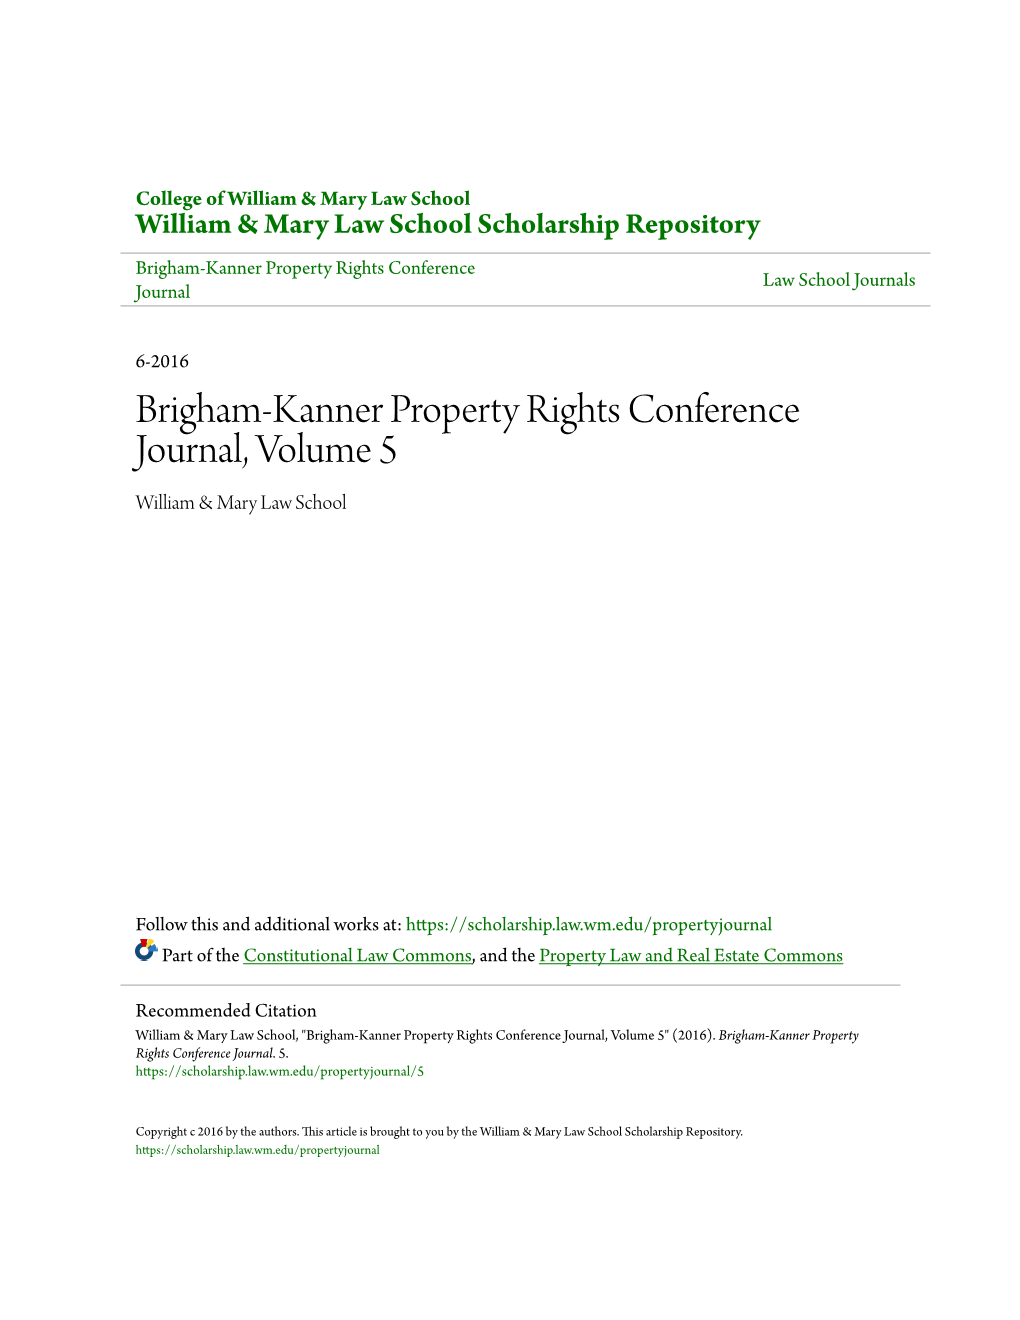 Brigham-Kanner Property Rights Conference Journal, Volume 5 William & Mary Law School